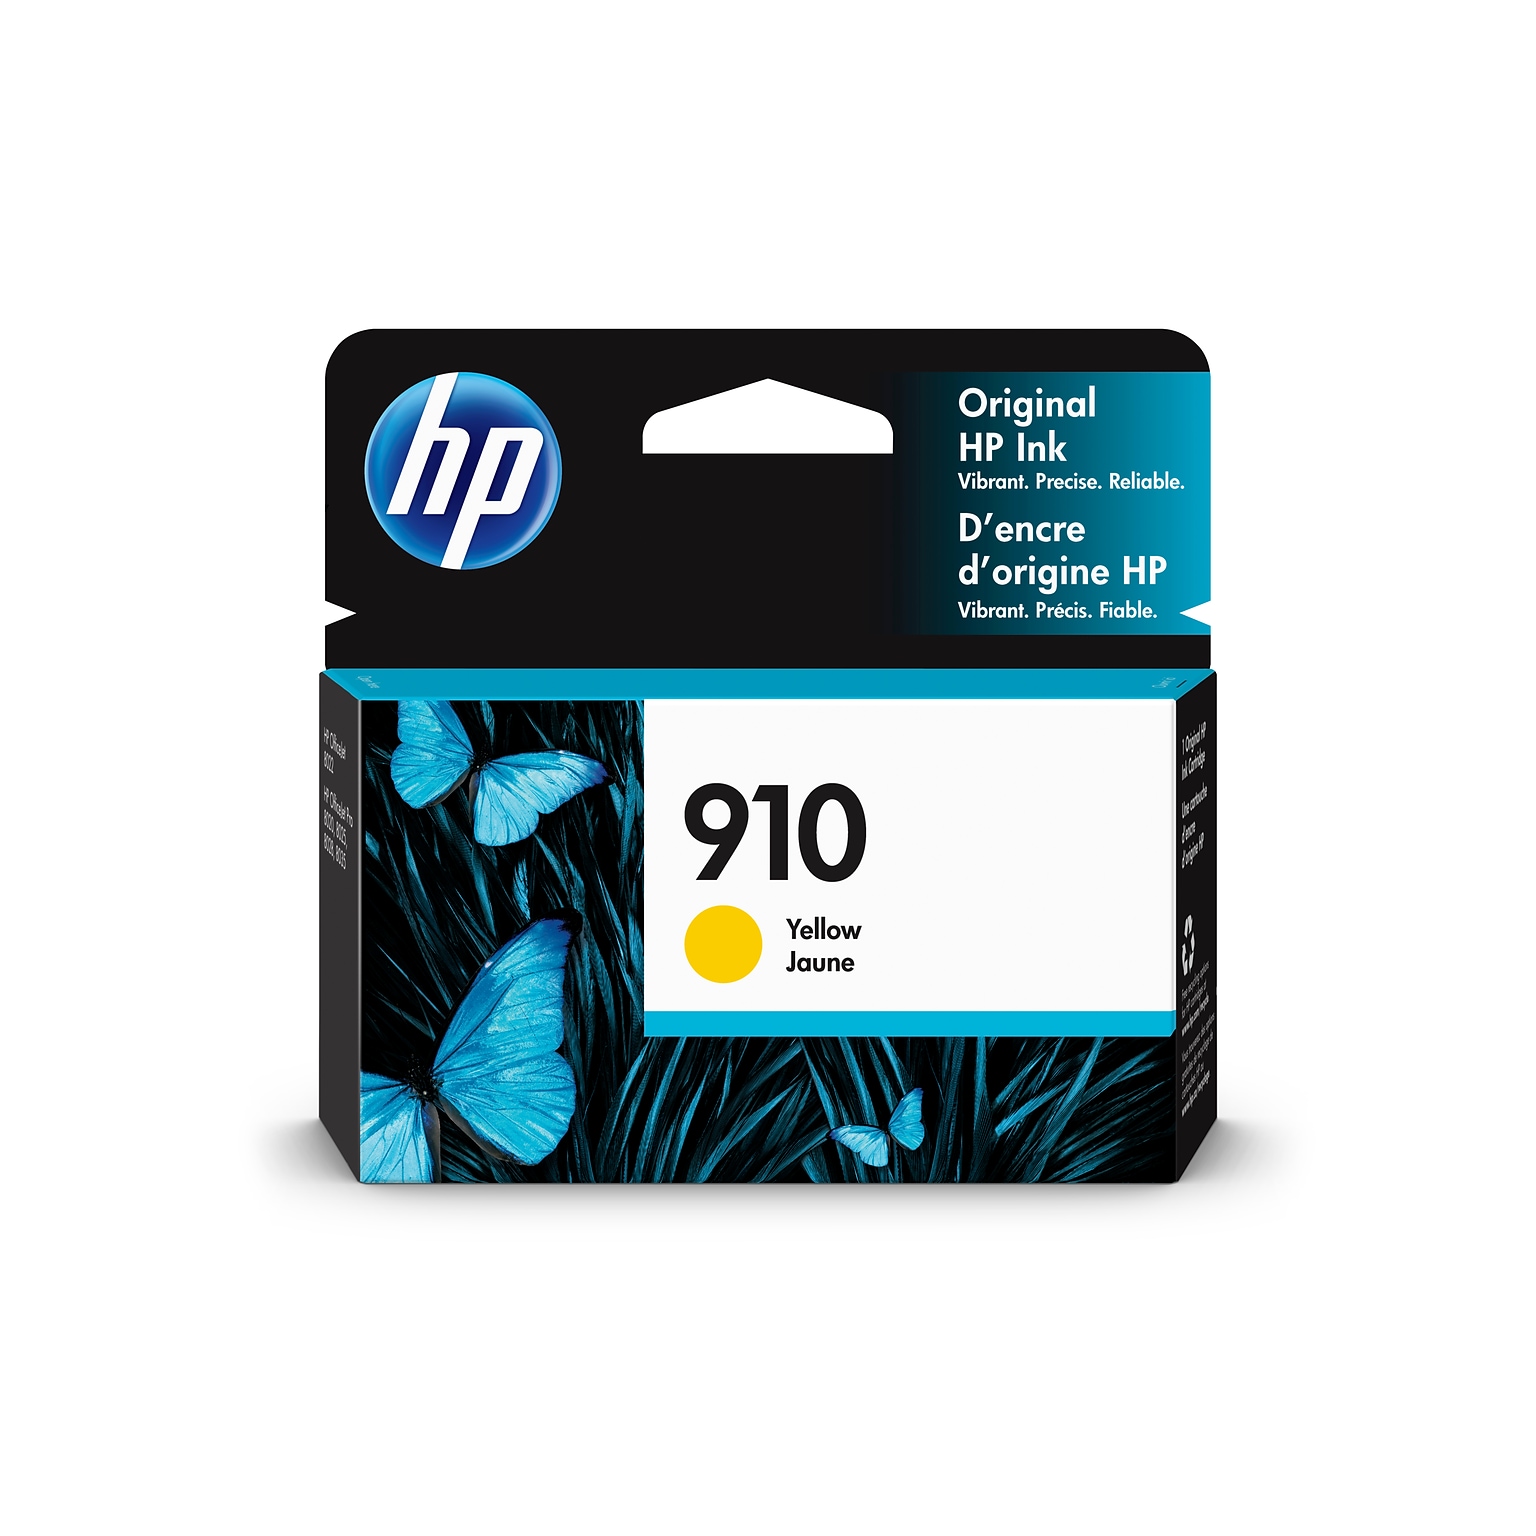 HP 910 Yellow Standard Yield Ink Cartridge (3YL60AN#140), print up to 315 pages